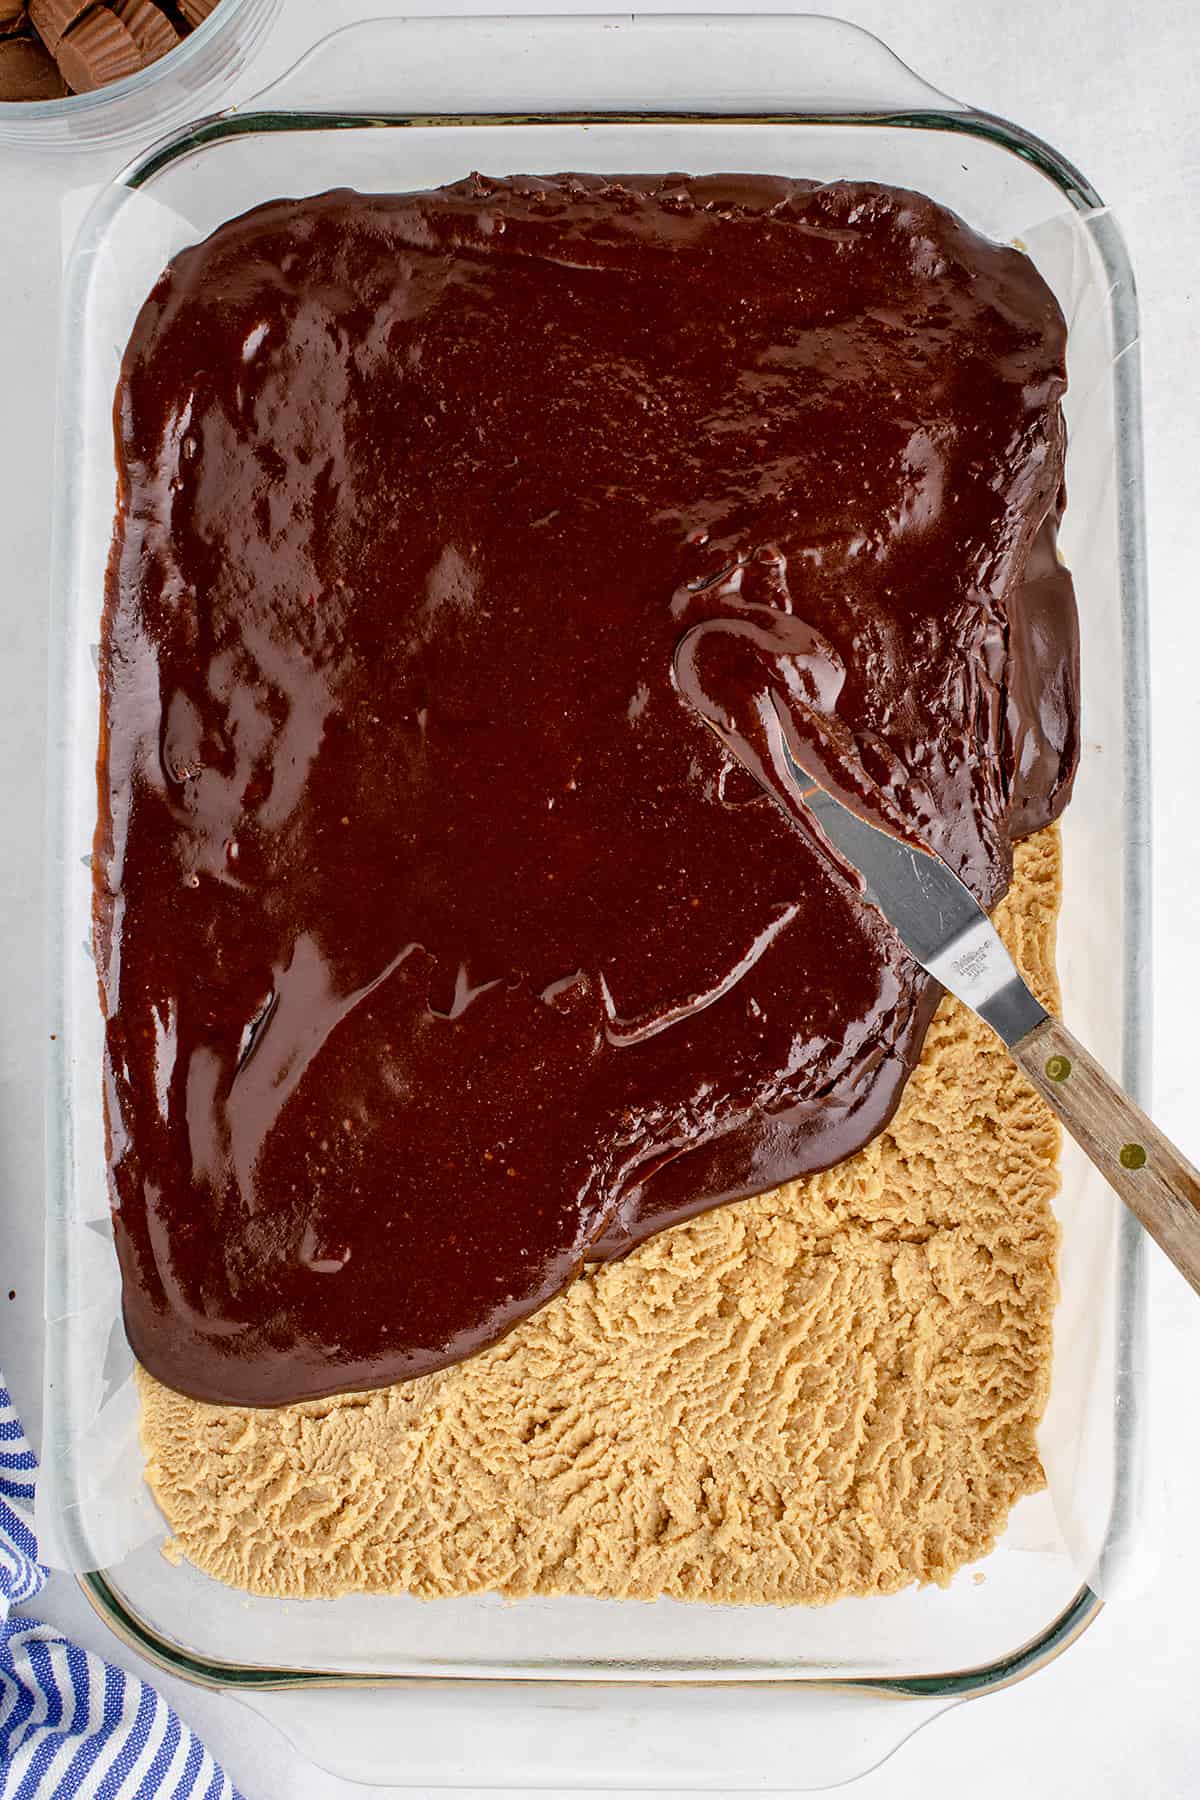 Chocolate frosting being spread over peanut butter.